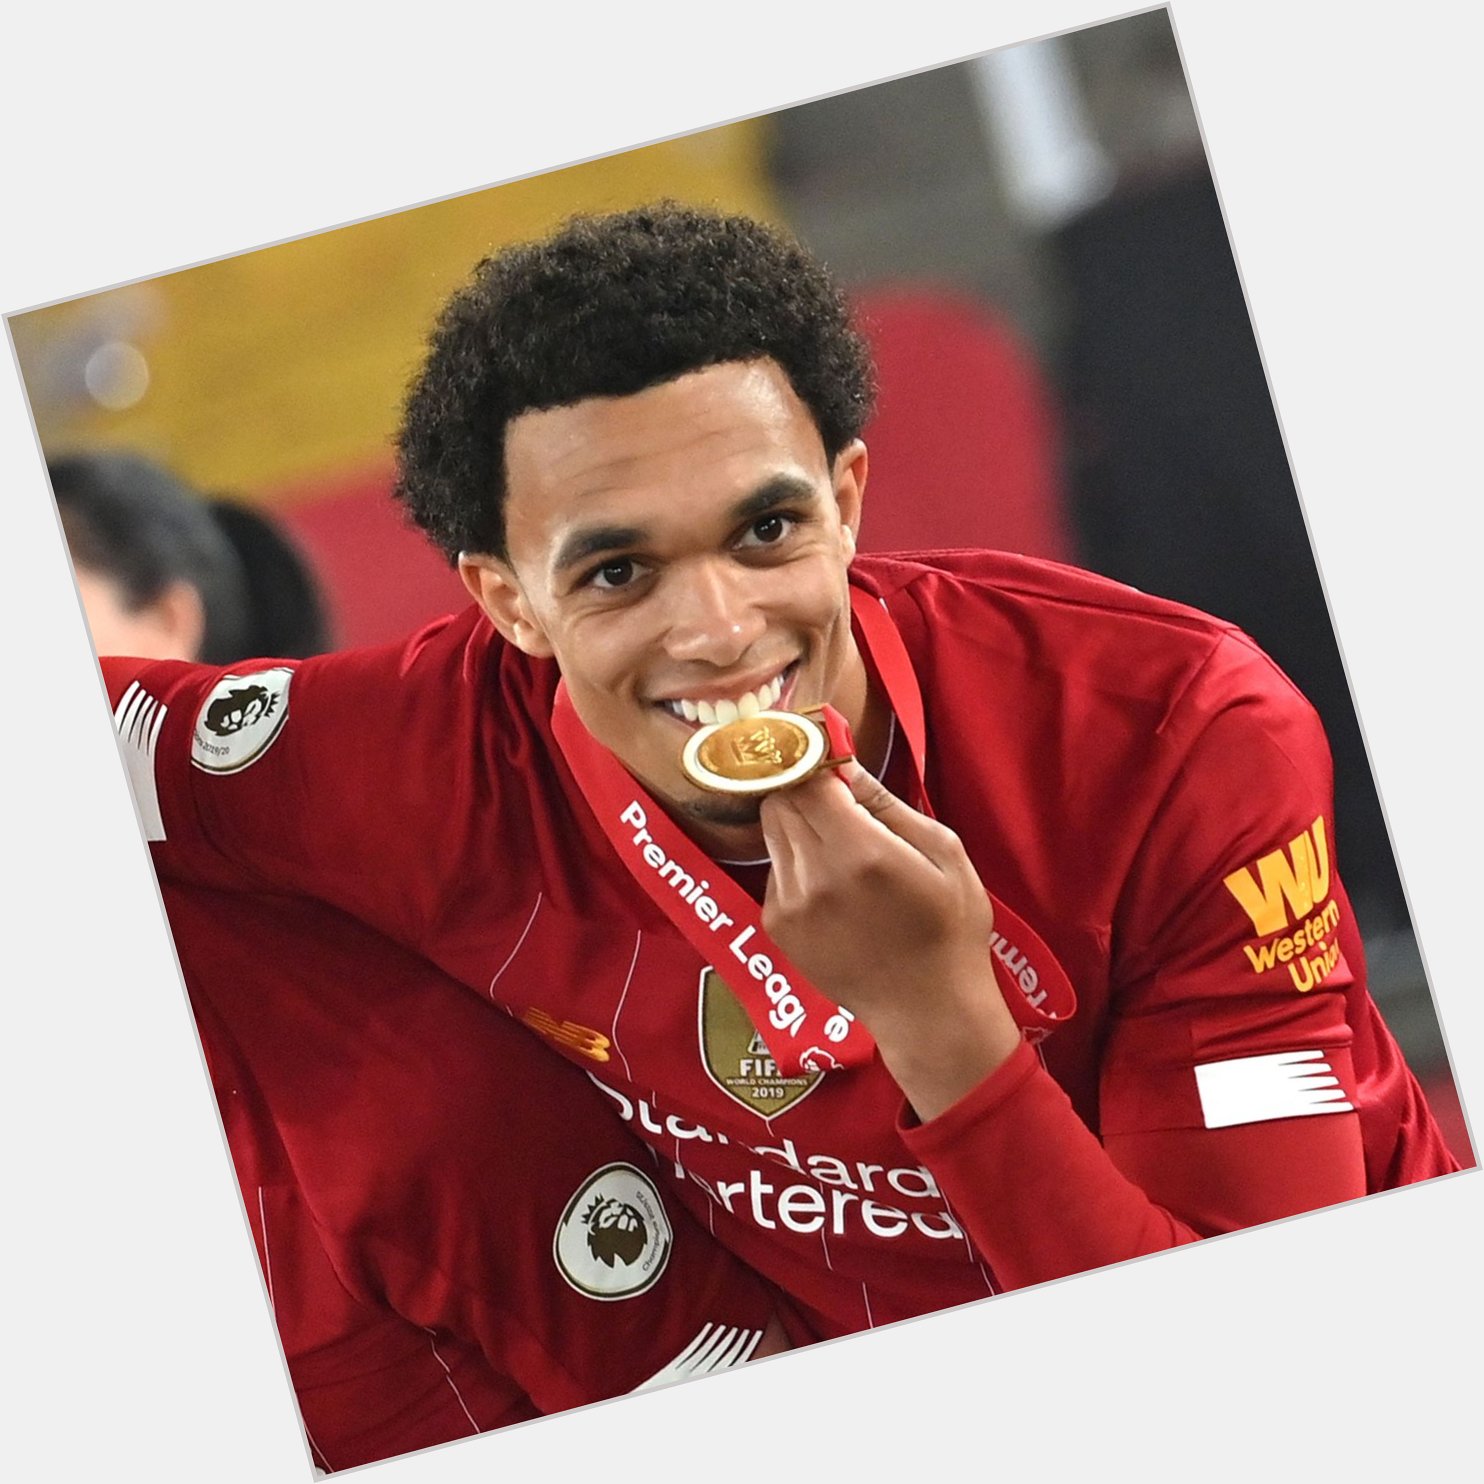 Happy birthday to two Premier League title winners Trent Alexander-Arnold (22) & Diego Costa (32) 